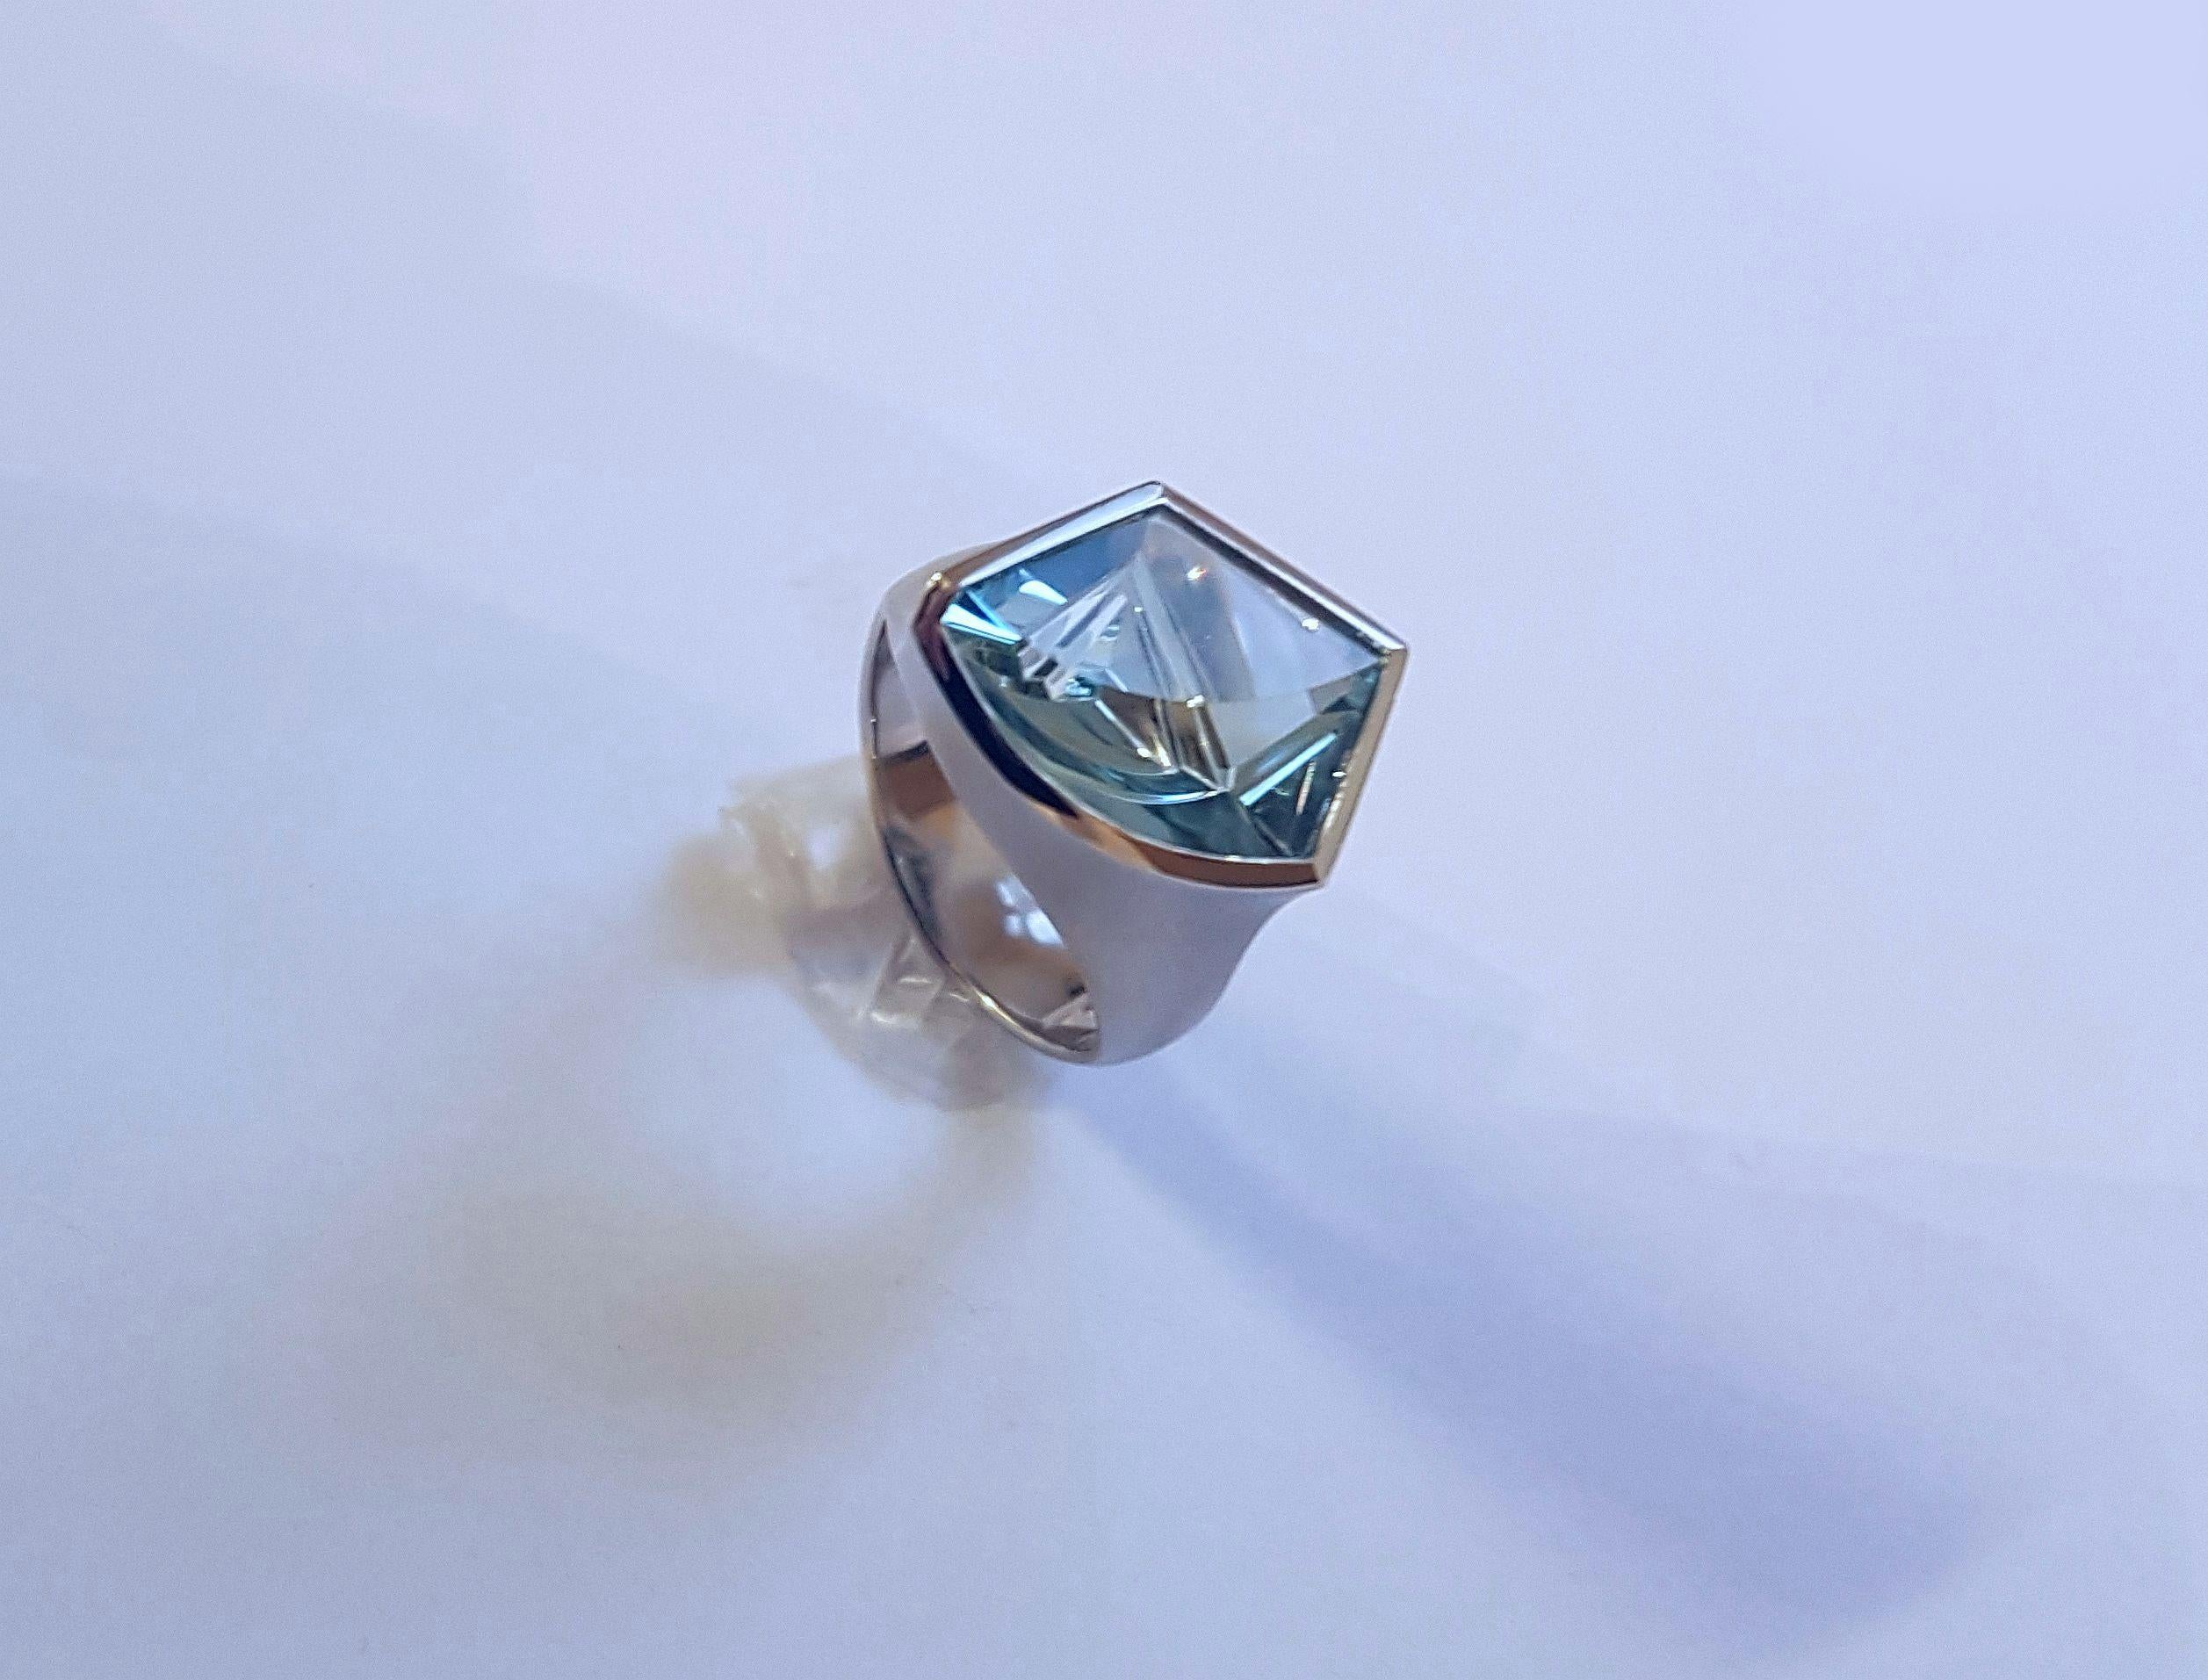 The radiant and vivid blue 4,74 carat aquamarine expertly cut by Atelier Munsteiner, set in precious platinum will set your heart aflutter. 
This beautiful ring can be worn to any occasion, be it formal or casual – go for it!
About the